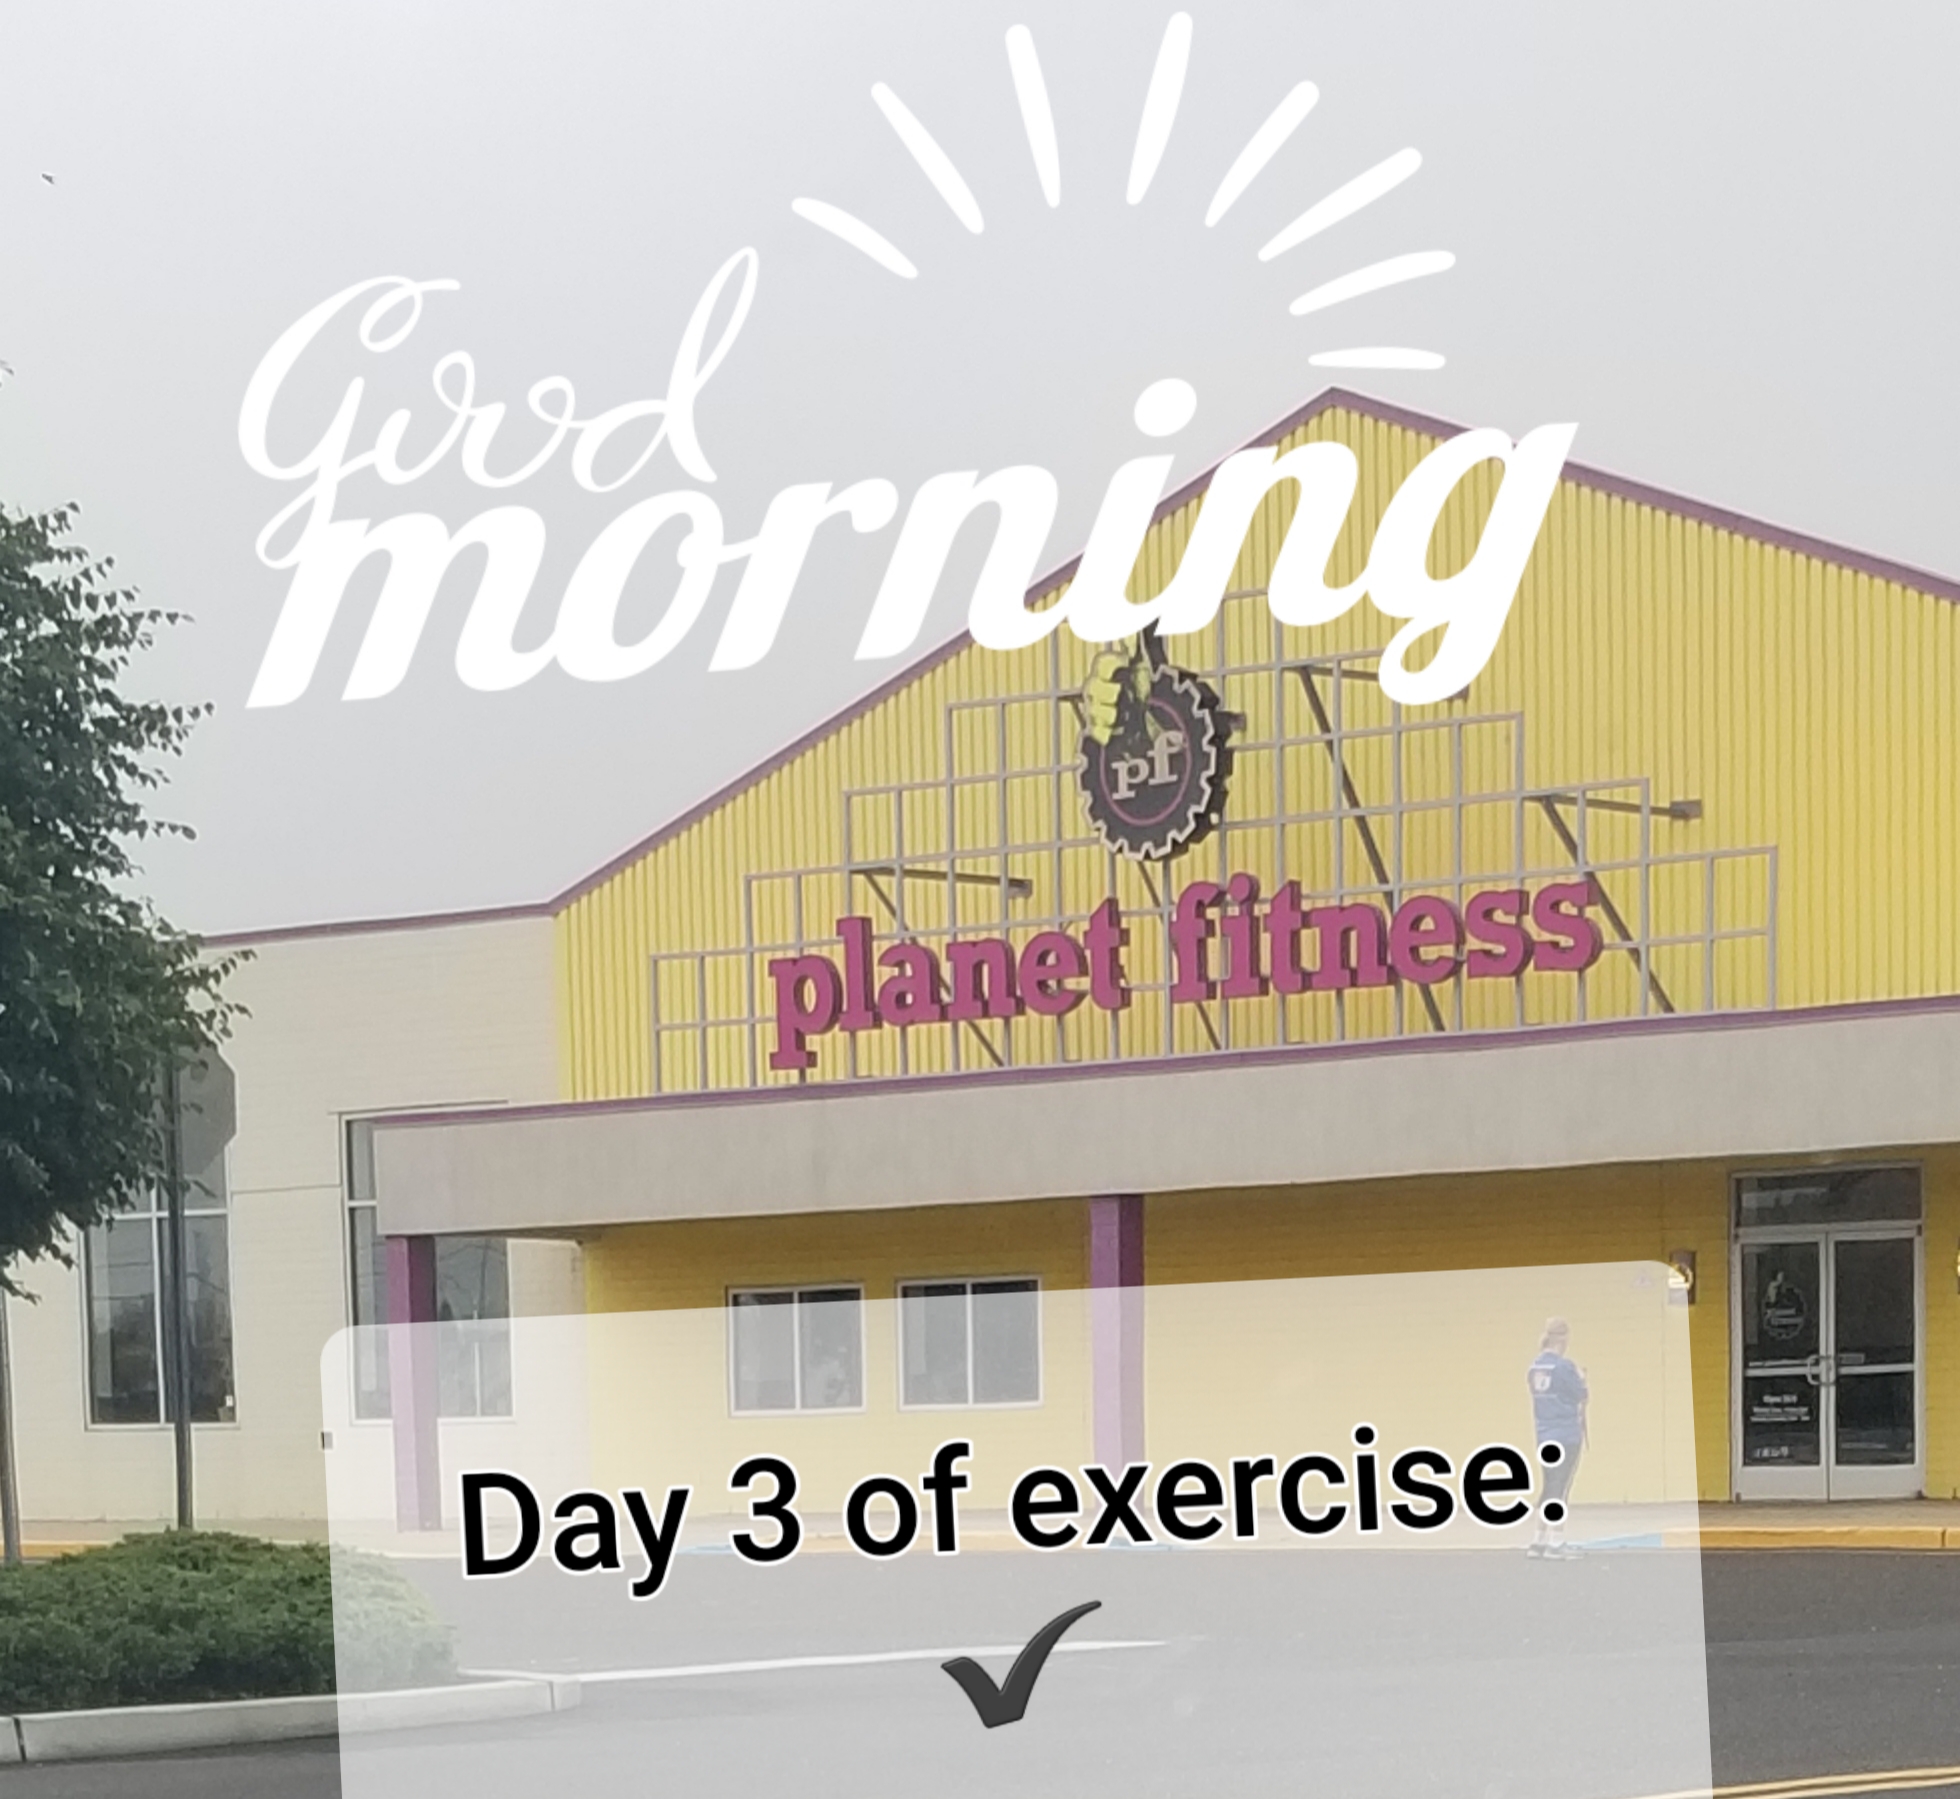 day 3 of exercise challenge: Kelly Heard Coaching